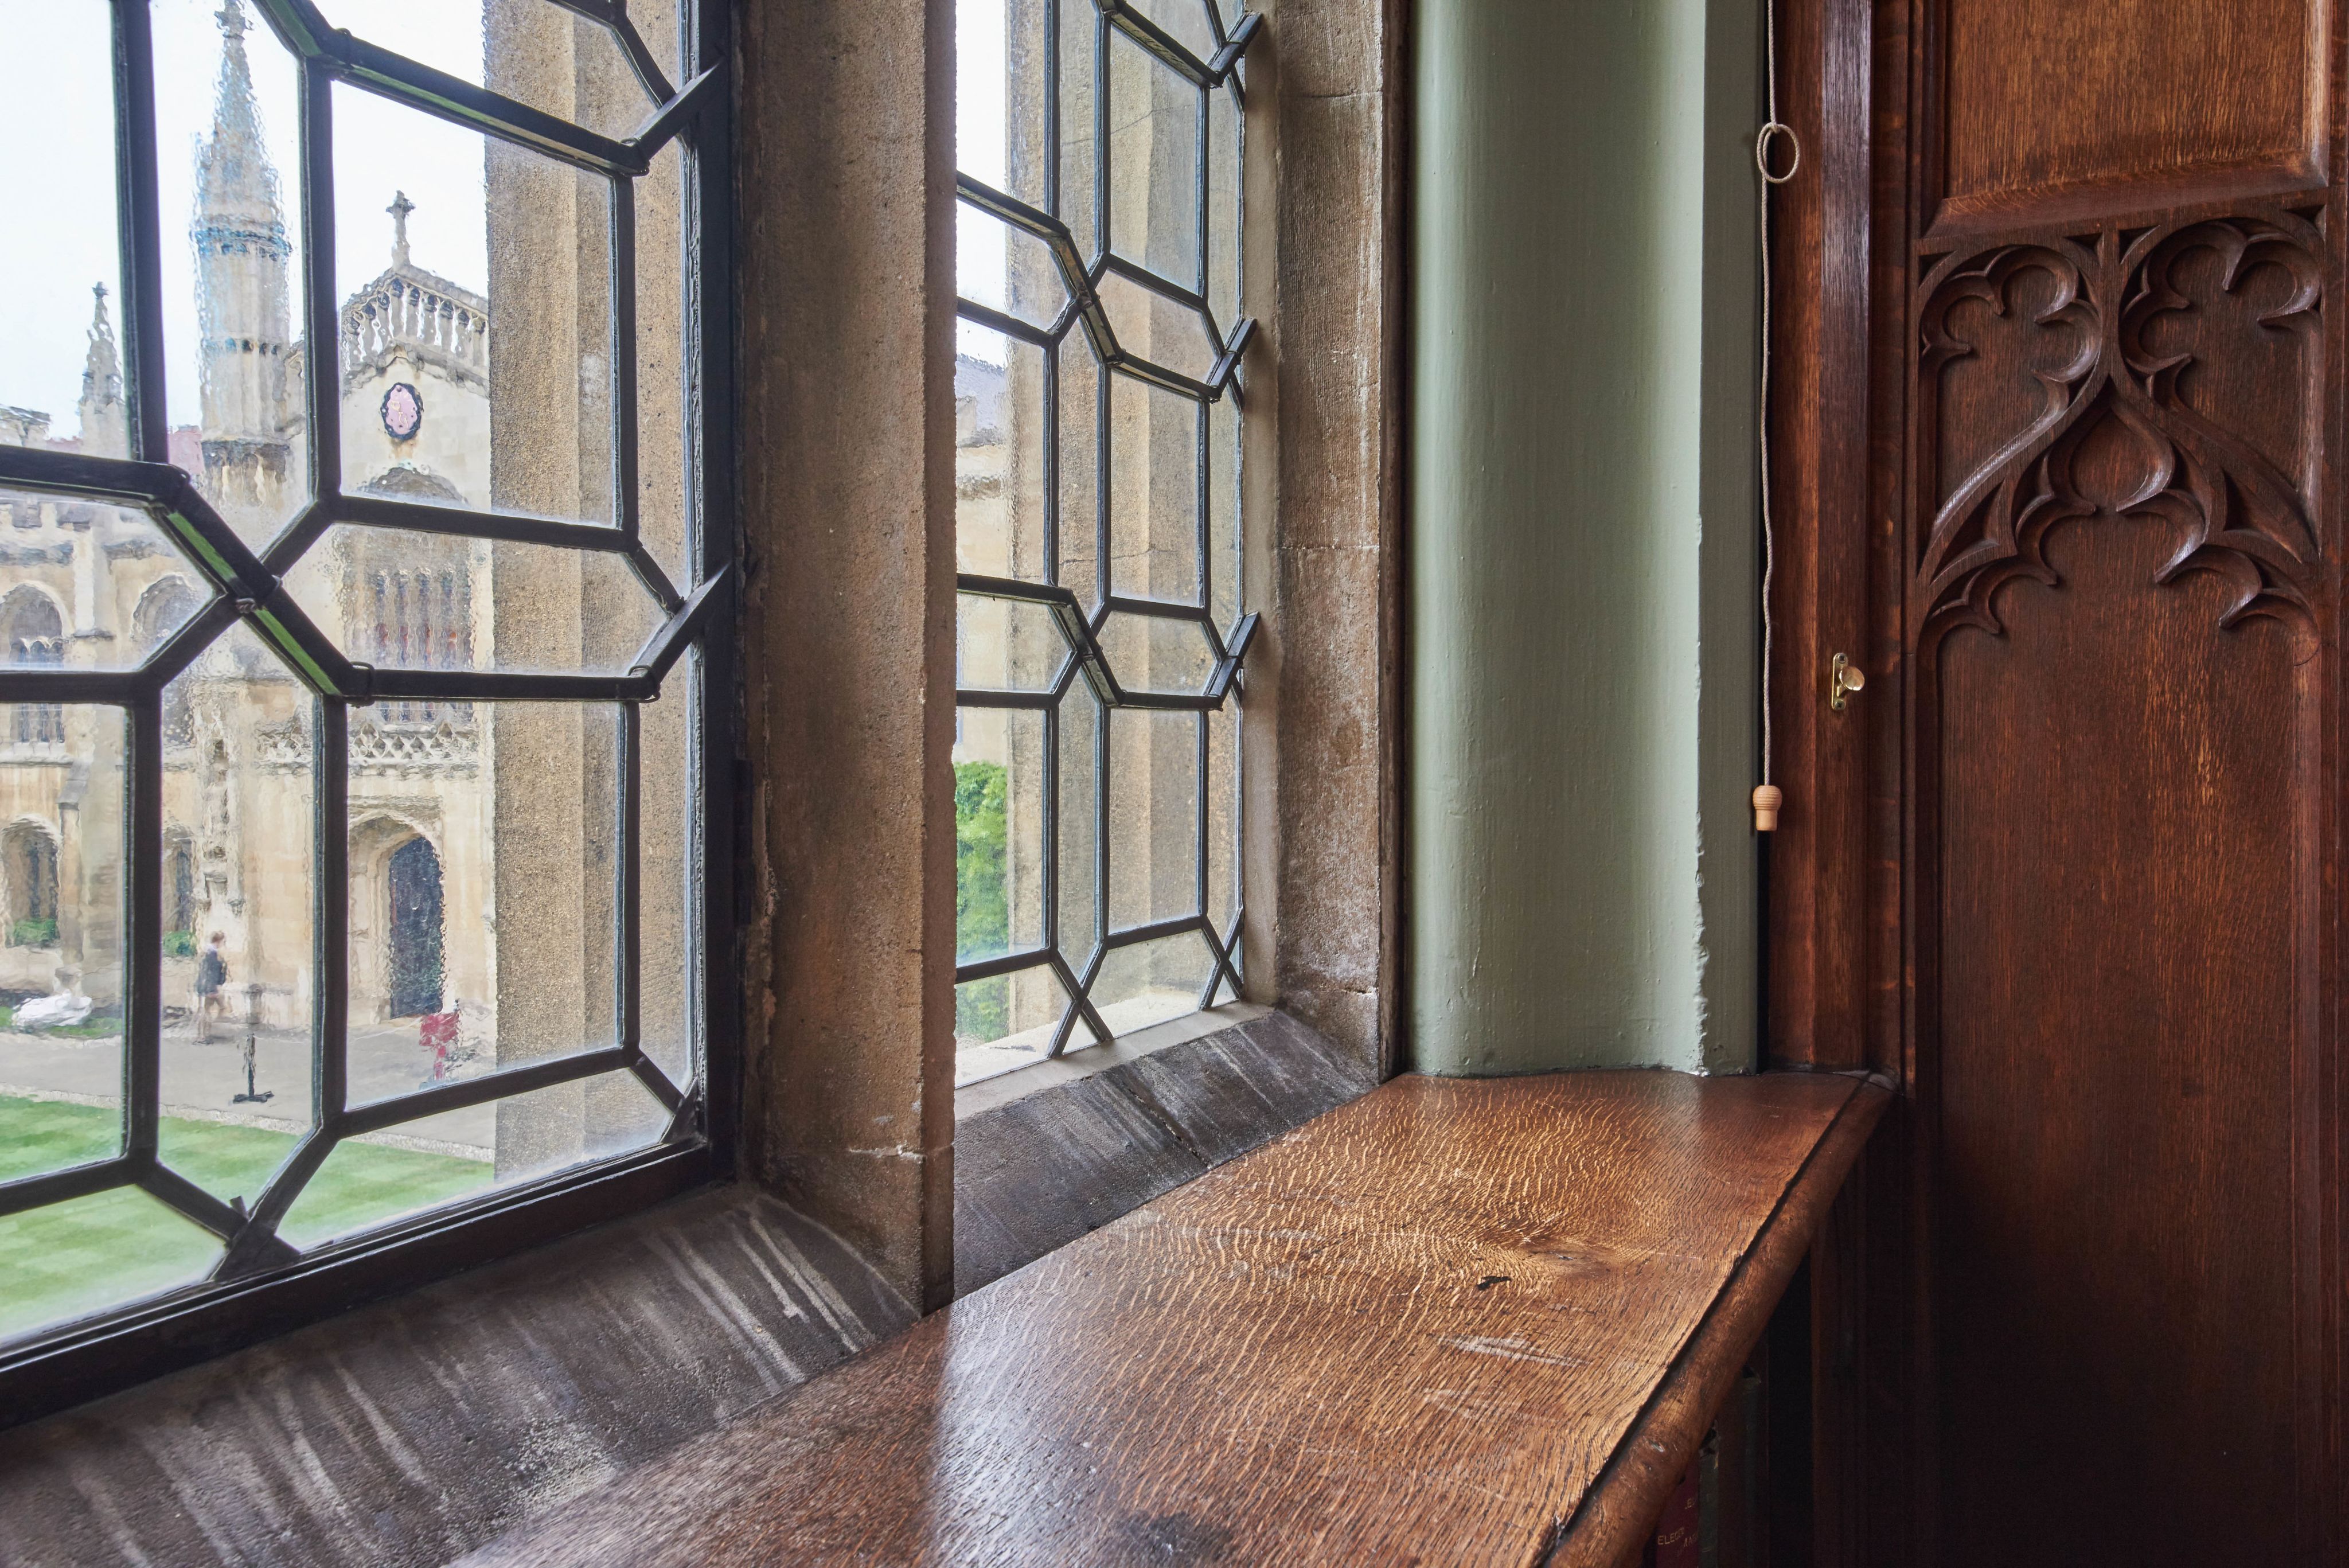 The Parker Library overlooks New Court and the Chapel of Corpus Christi College Cambridge. Corpus Christi is the only college in Cambridge and Oxford founded by the townspeople.